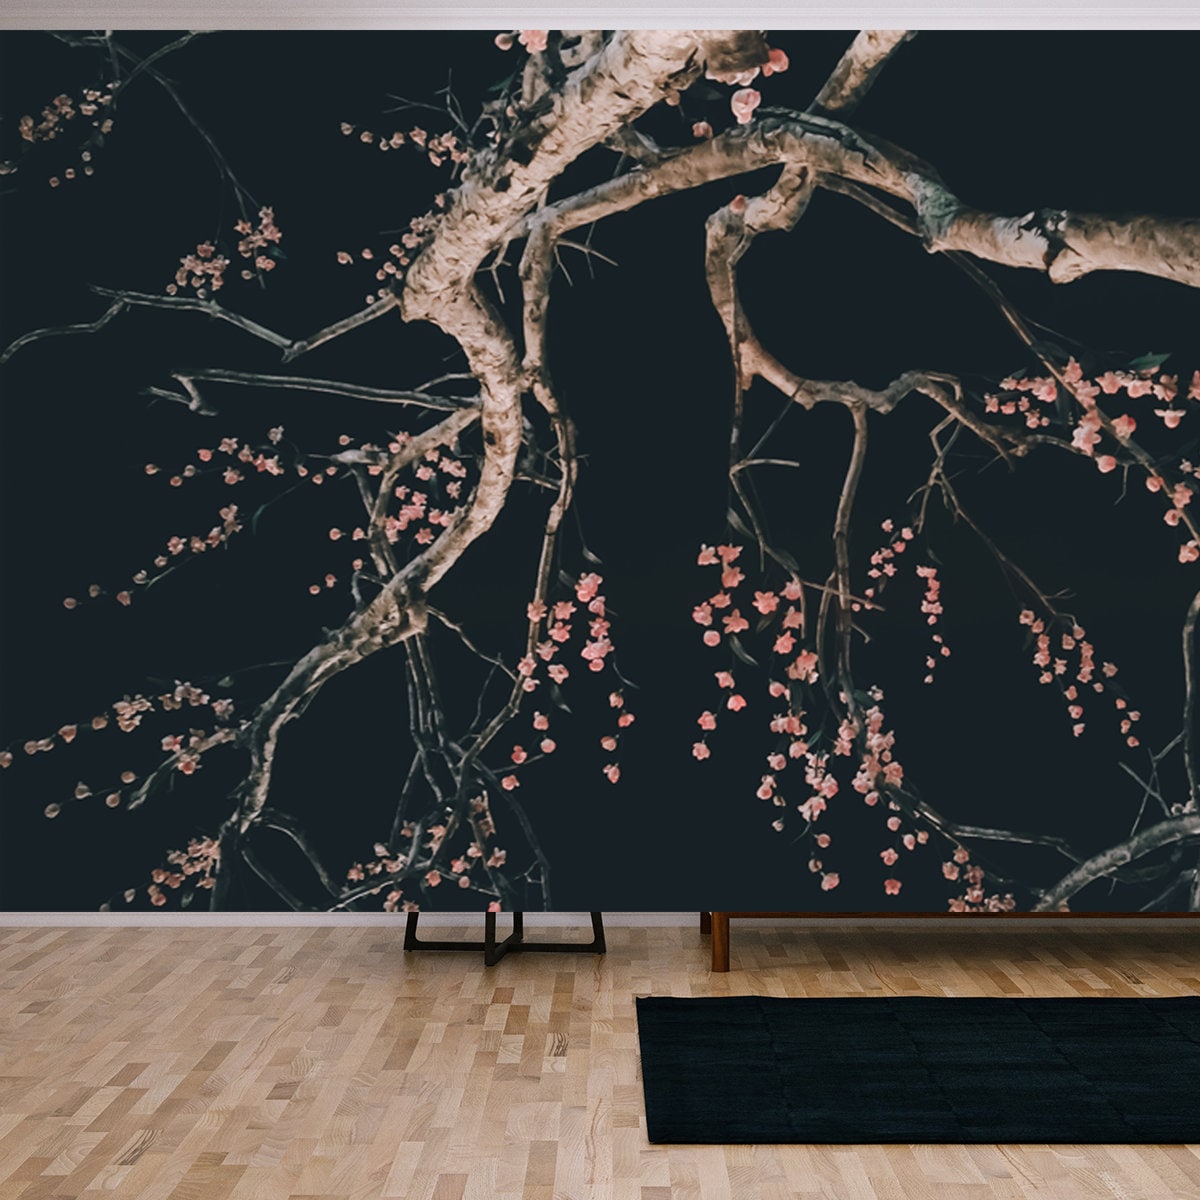 Abstract Blurred Artificial of Pink Sakura Flower Decorate on Dry Tree in Night Garden Wallpaper Living Room Mural